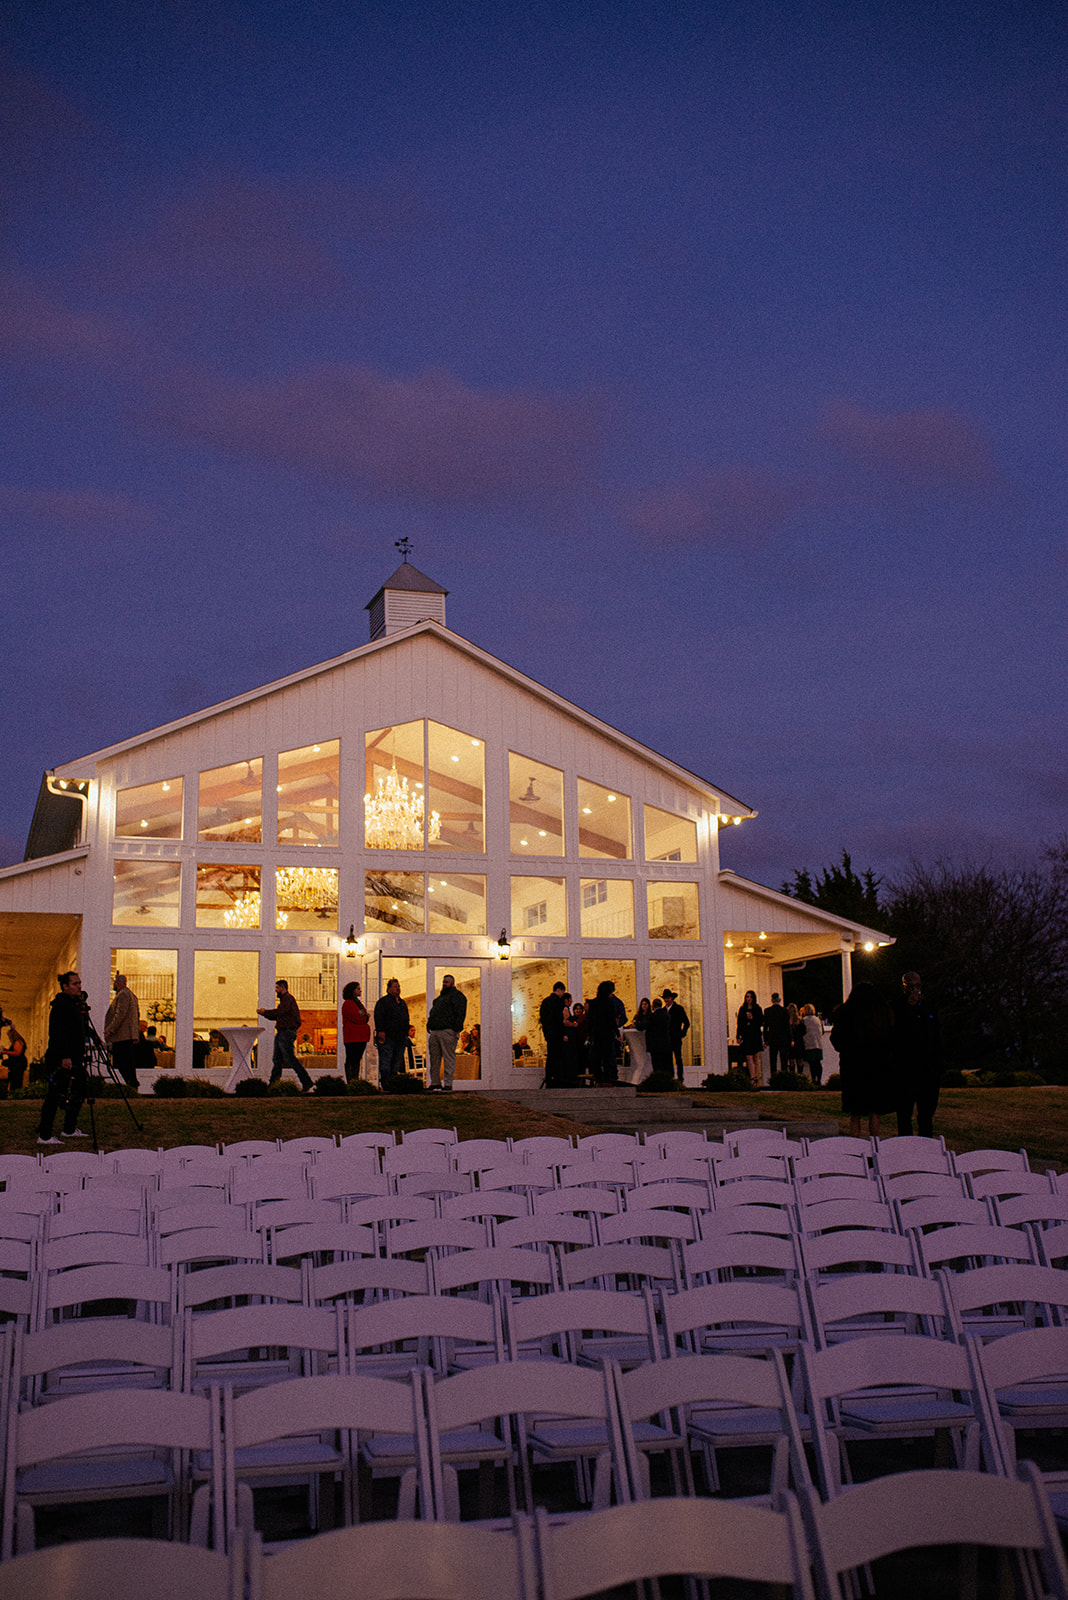 A nighttime photo of Firefly Gardens wedding venue and its wall of glass windows.